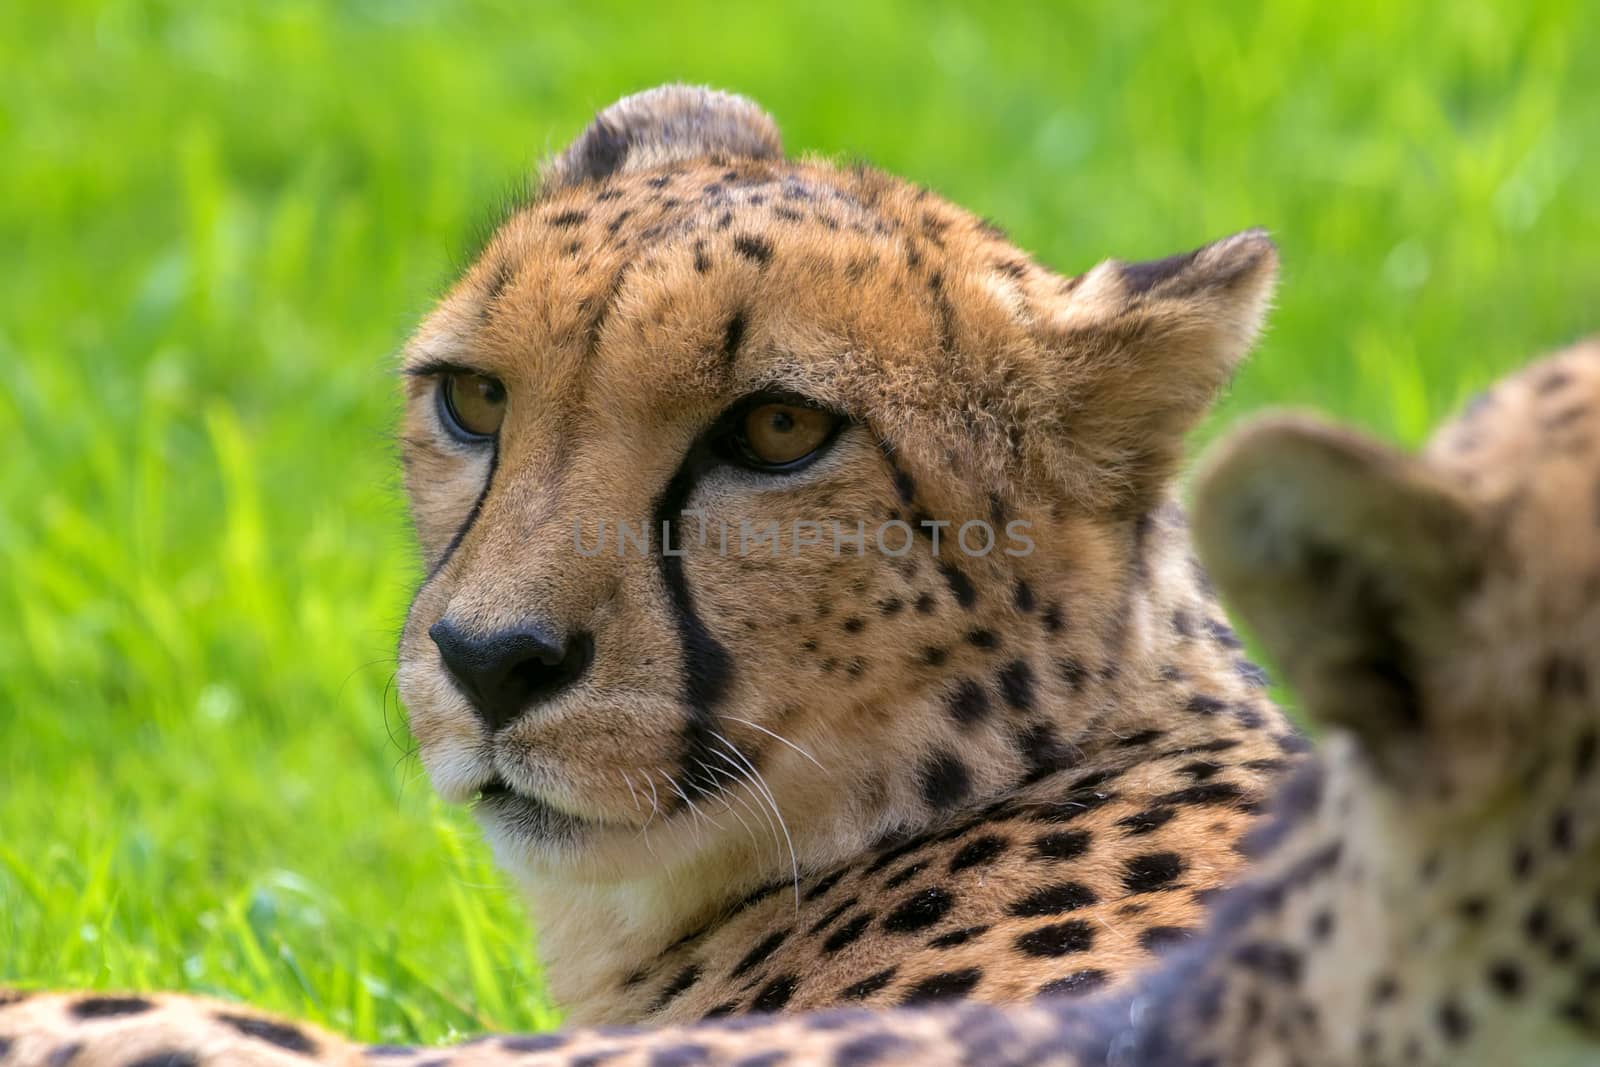 Cheetah Laying Down Resting and Looking Closeup Portrait